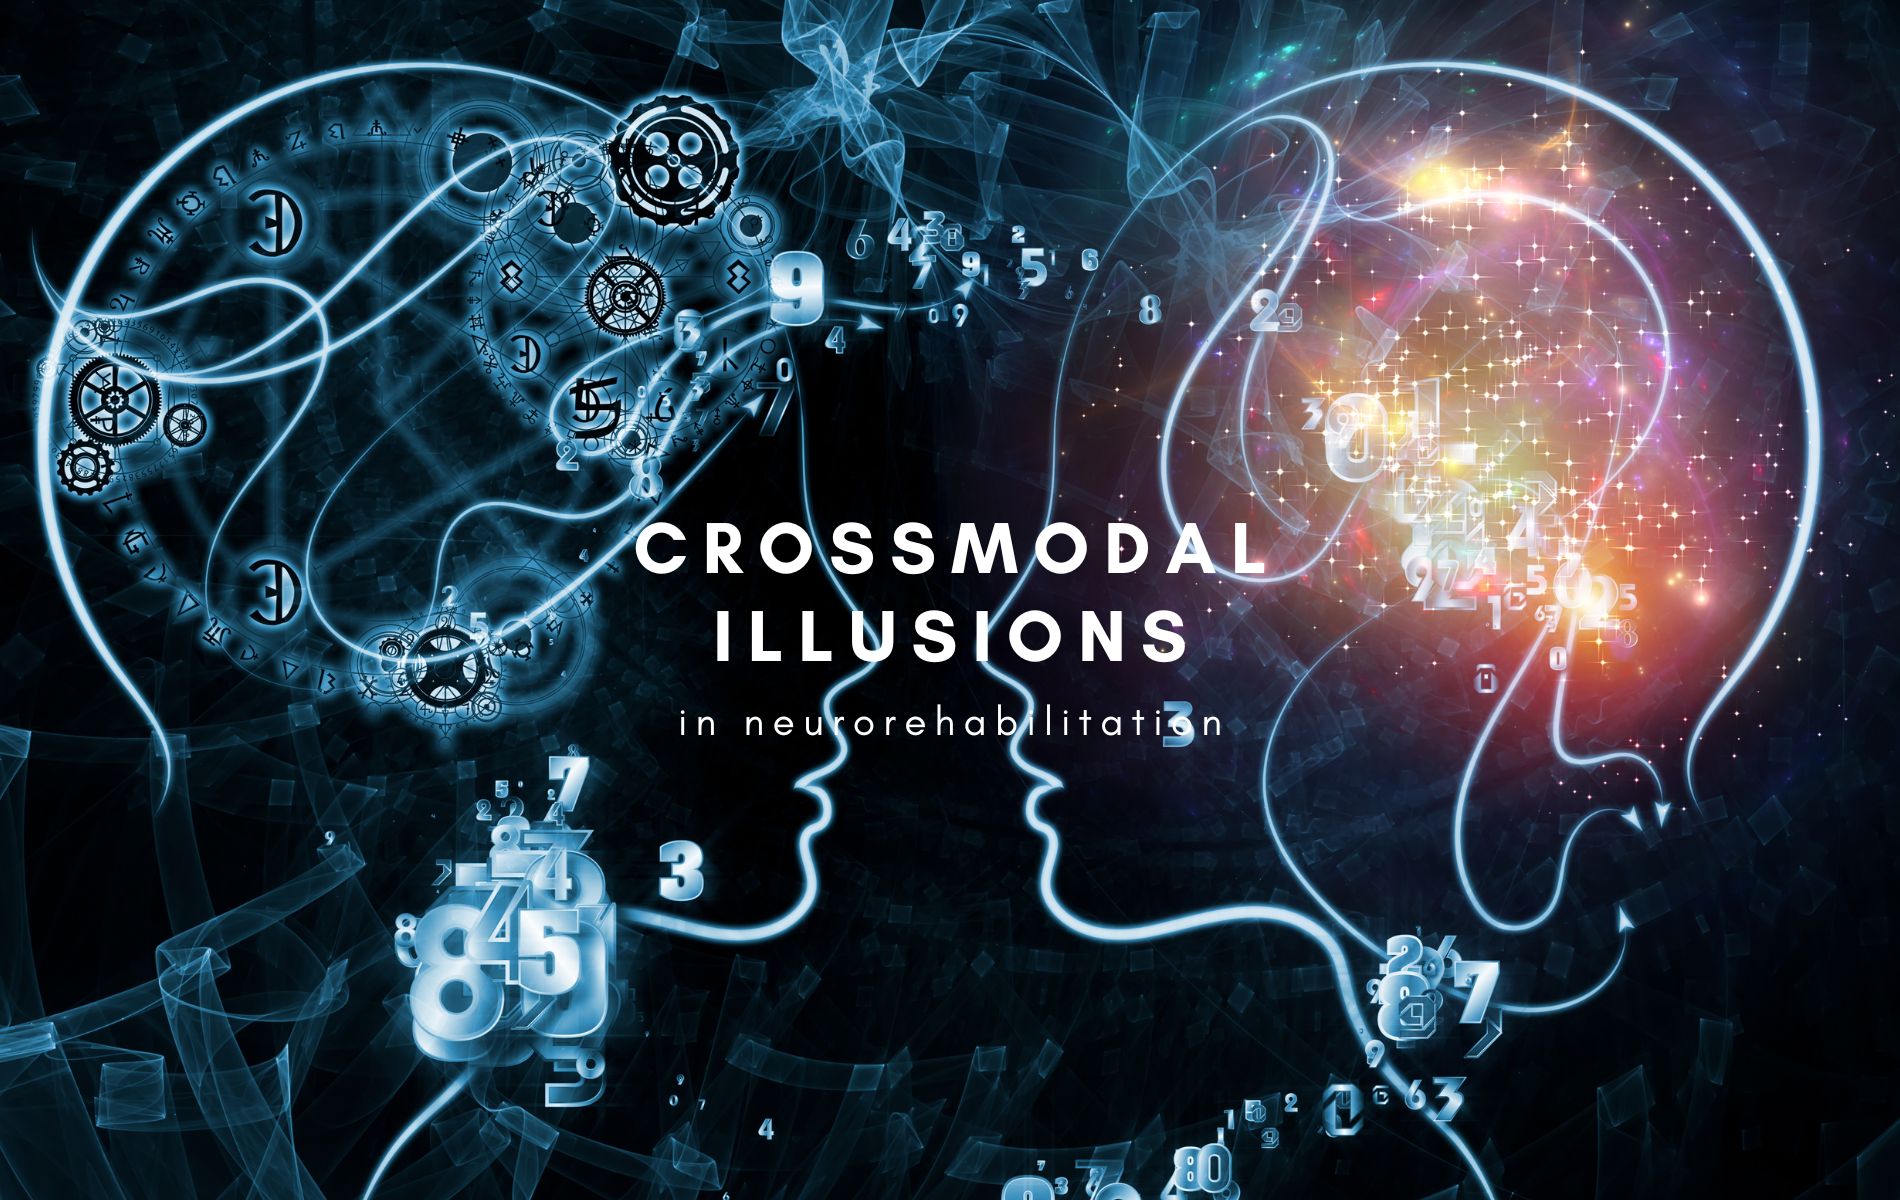 Crossmodal Illusions in neurorehabilitation – other perspectives –